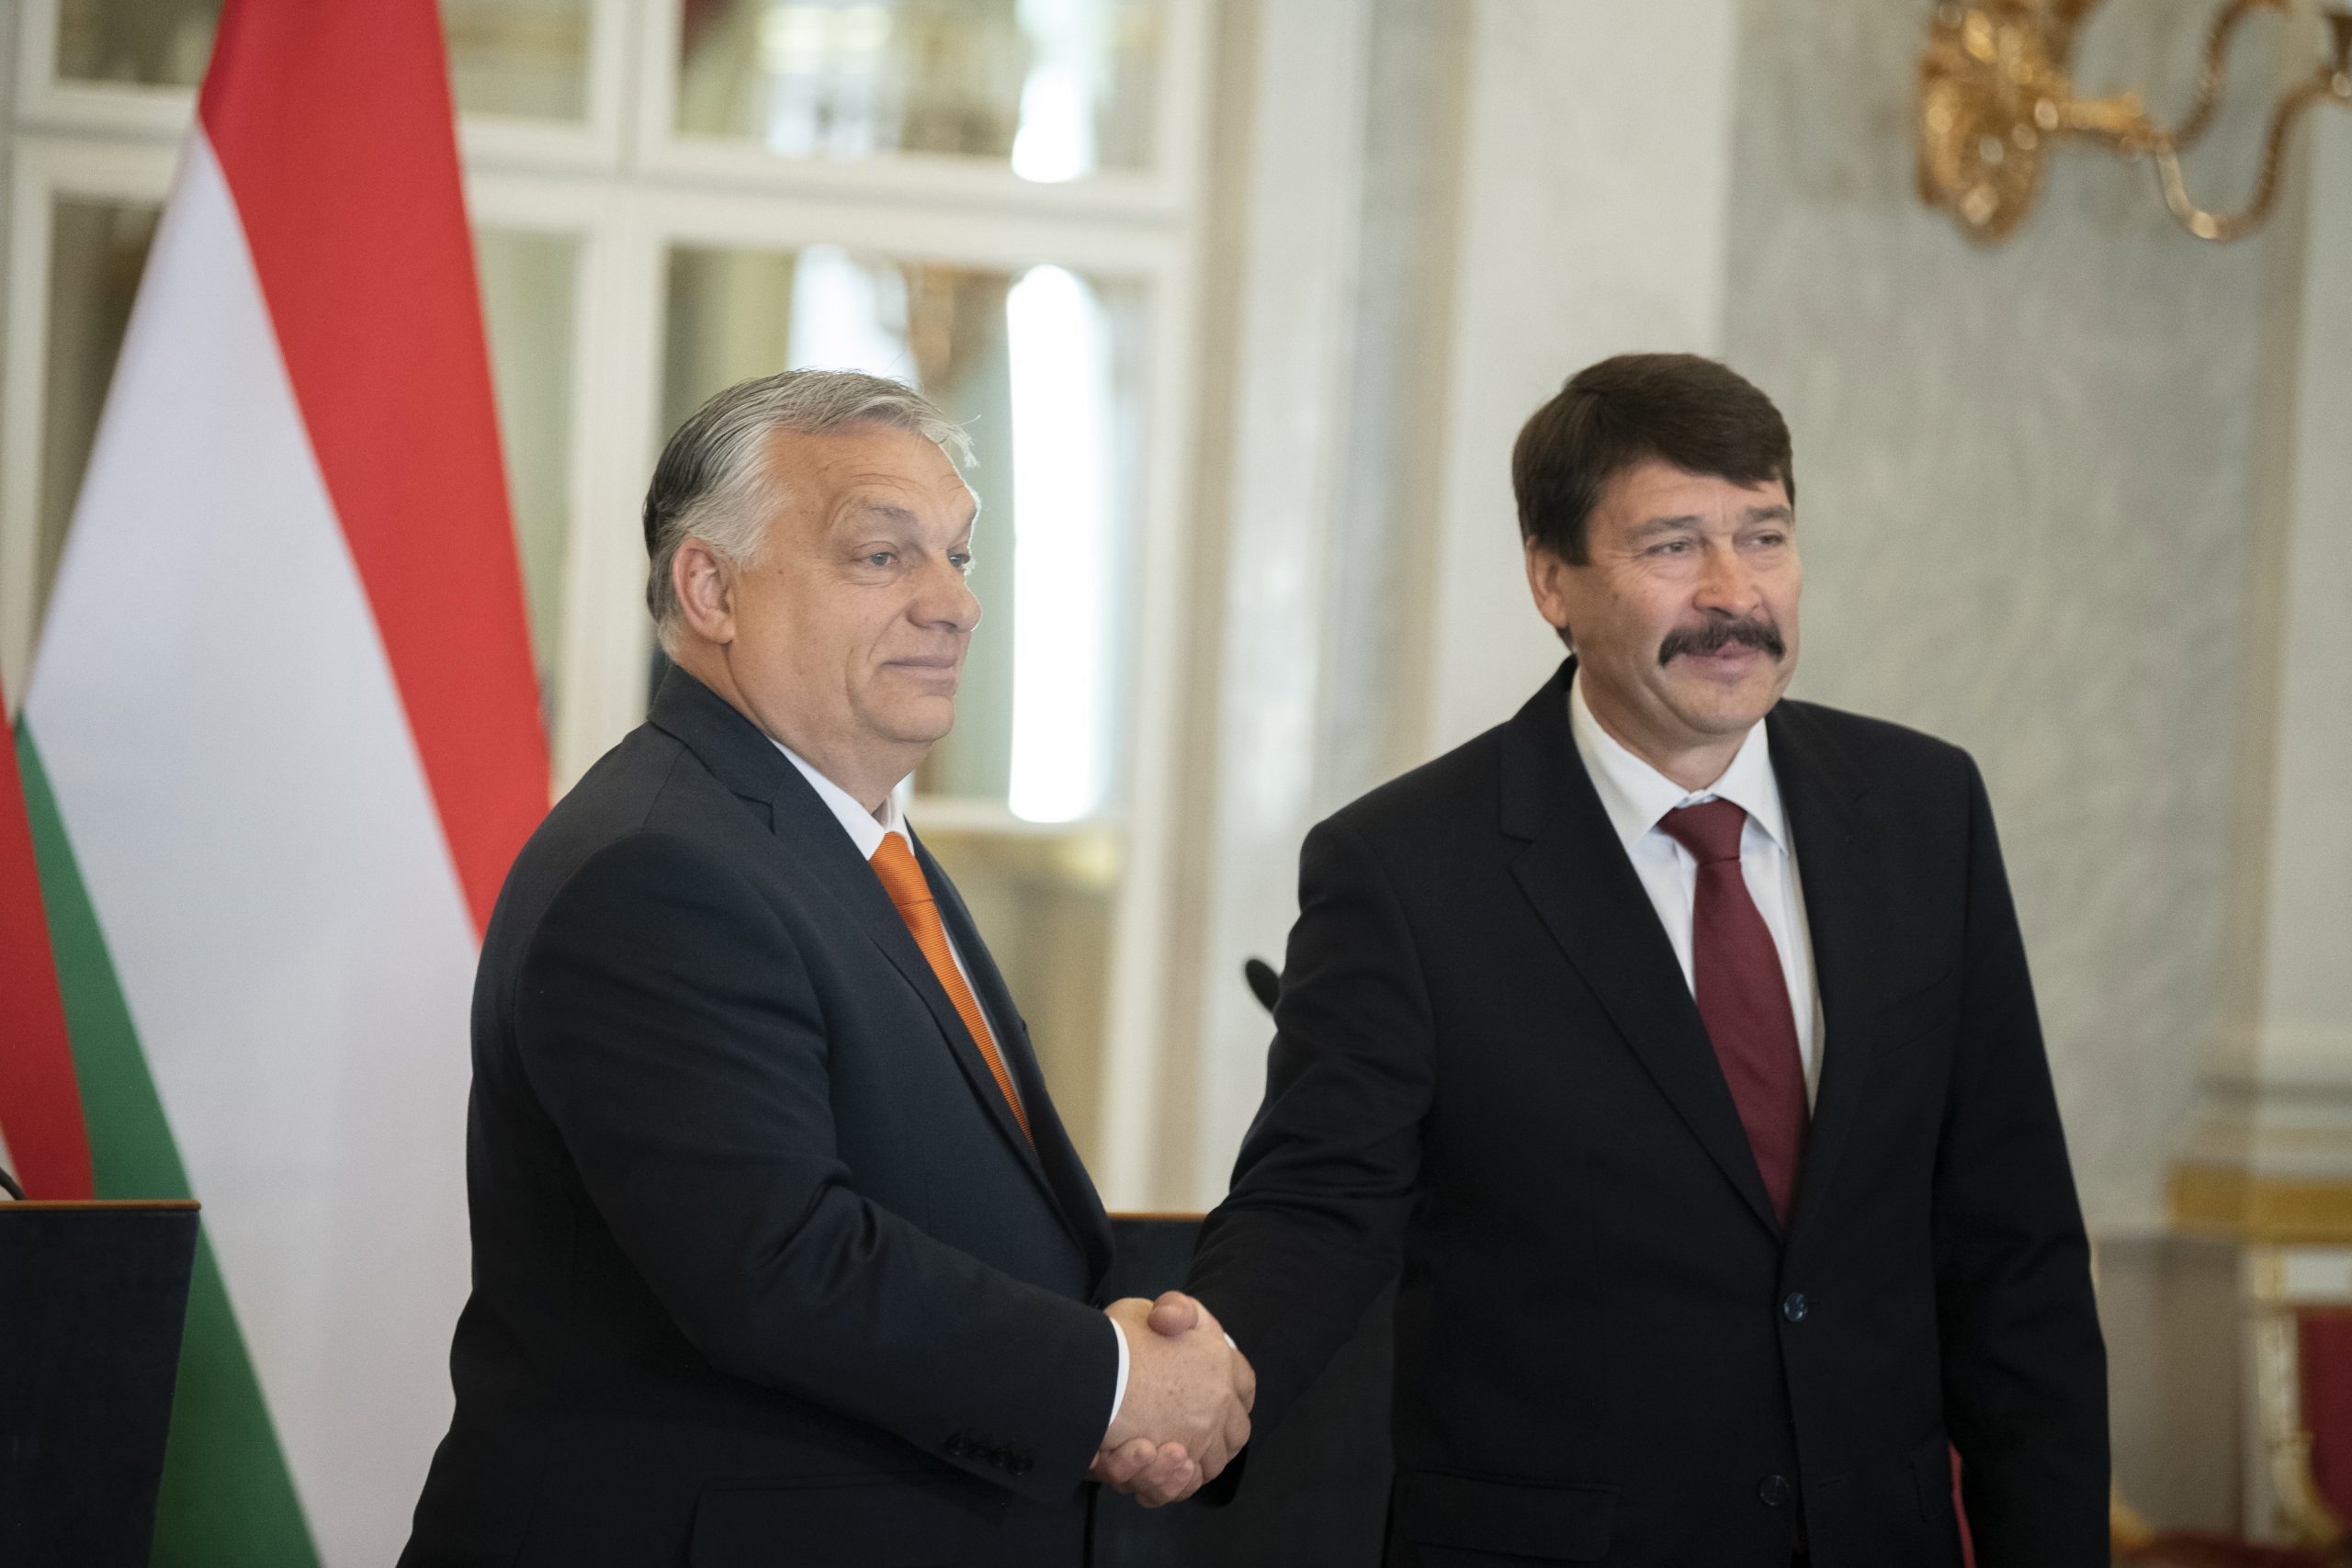 President Áder Asks Orbán to Form New Government